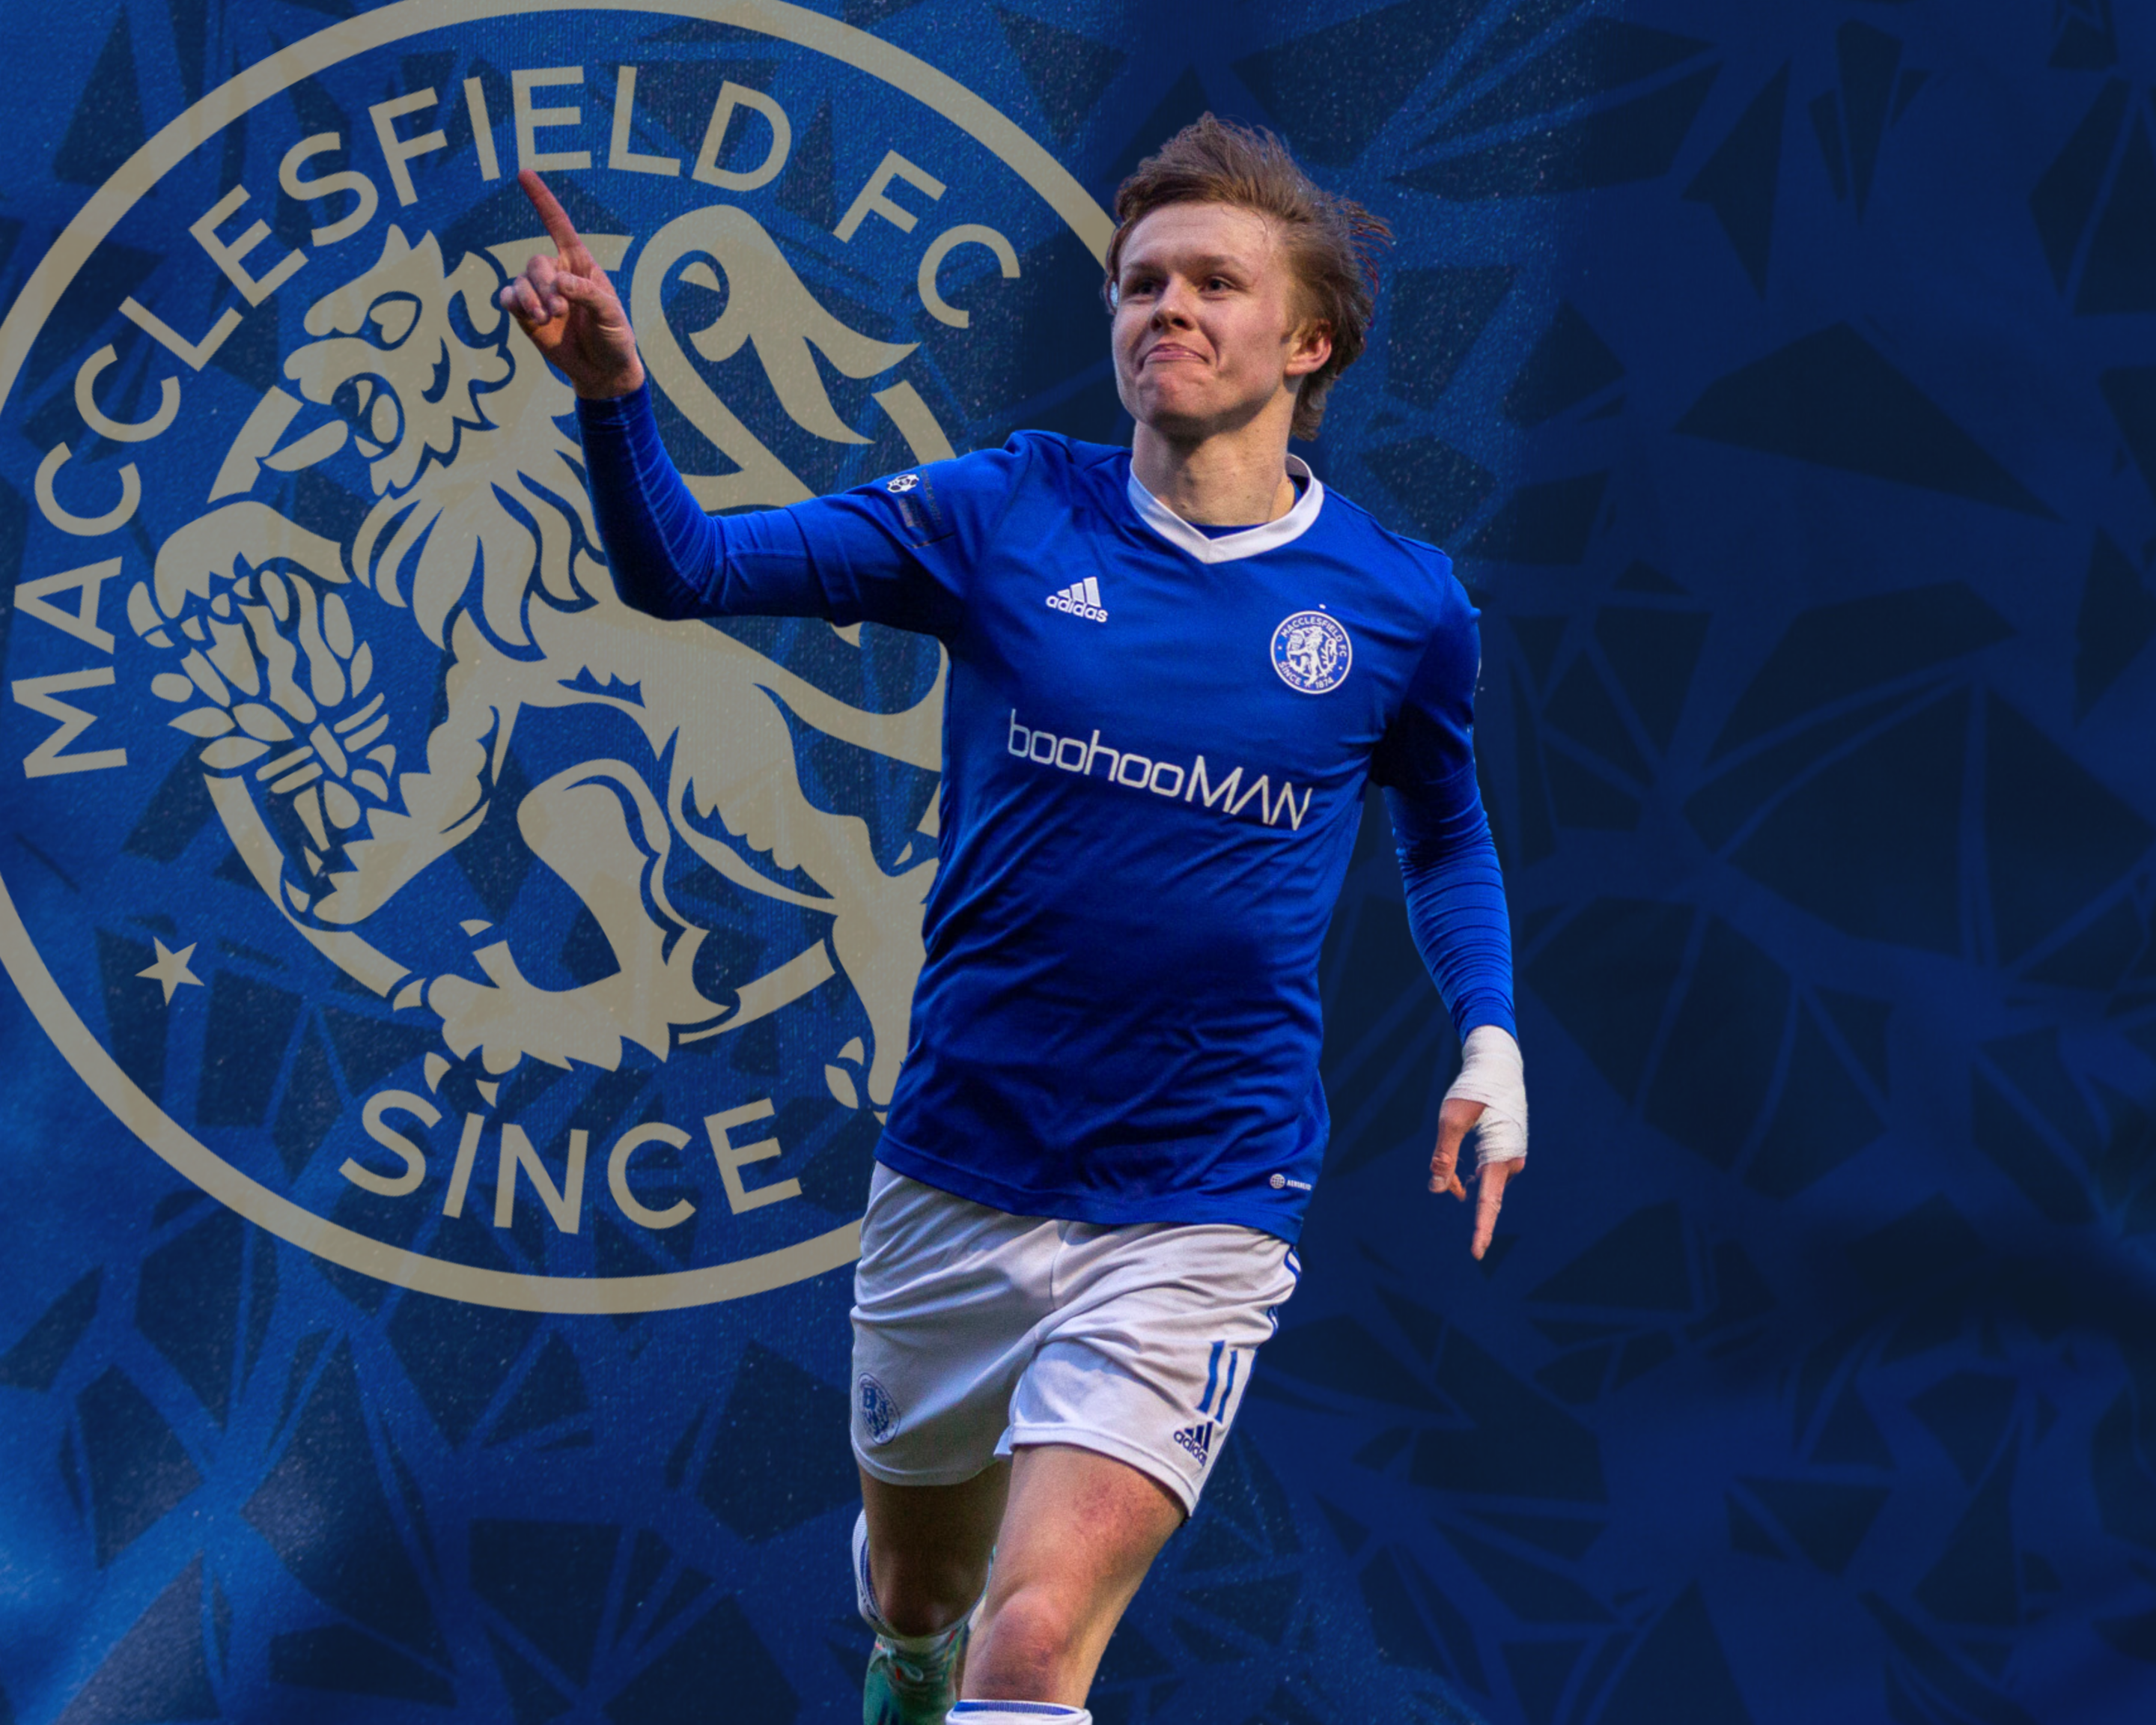 MATCH PREVIEW: MACCLESFIELD V HANLEY TOWN